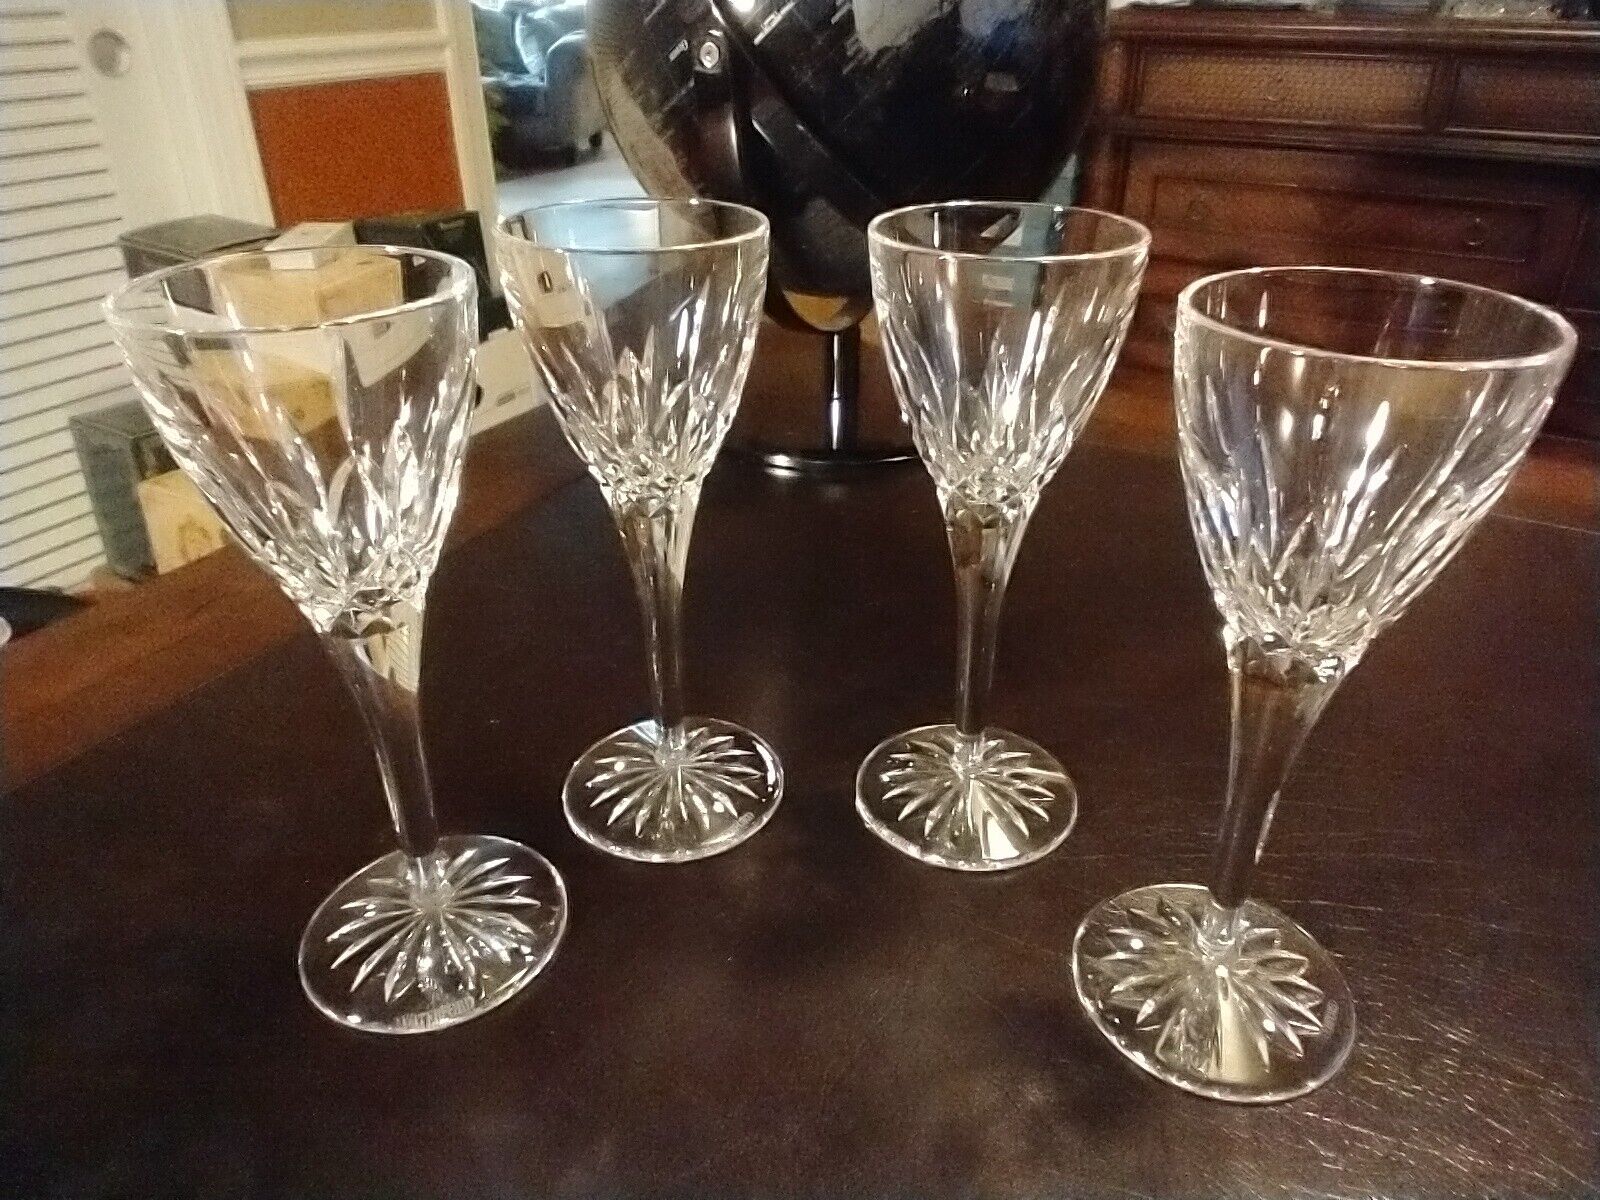 Waterford Lismore Set Of 4 Cut Crystal Cordial Glasses 6.5in Heavy and EX Cond.